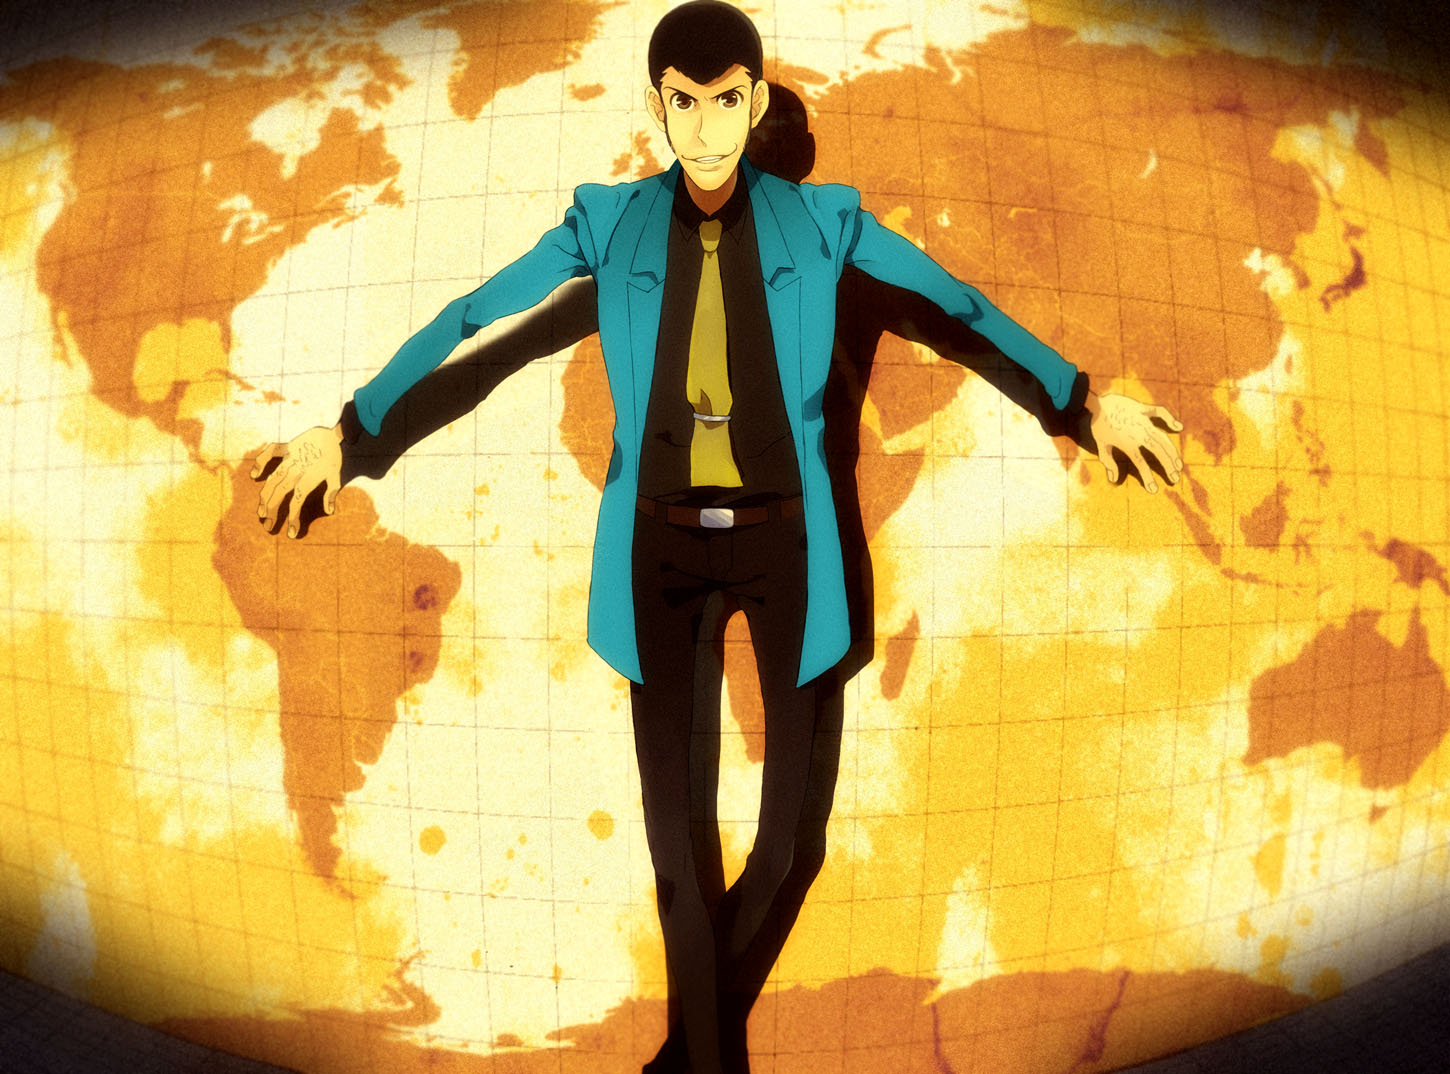 Lupin The 3rd Wallpaper Anime Hq Pictures 4k